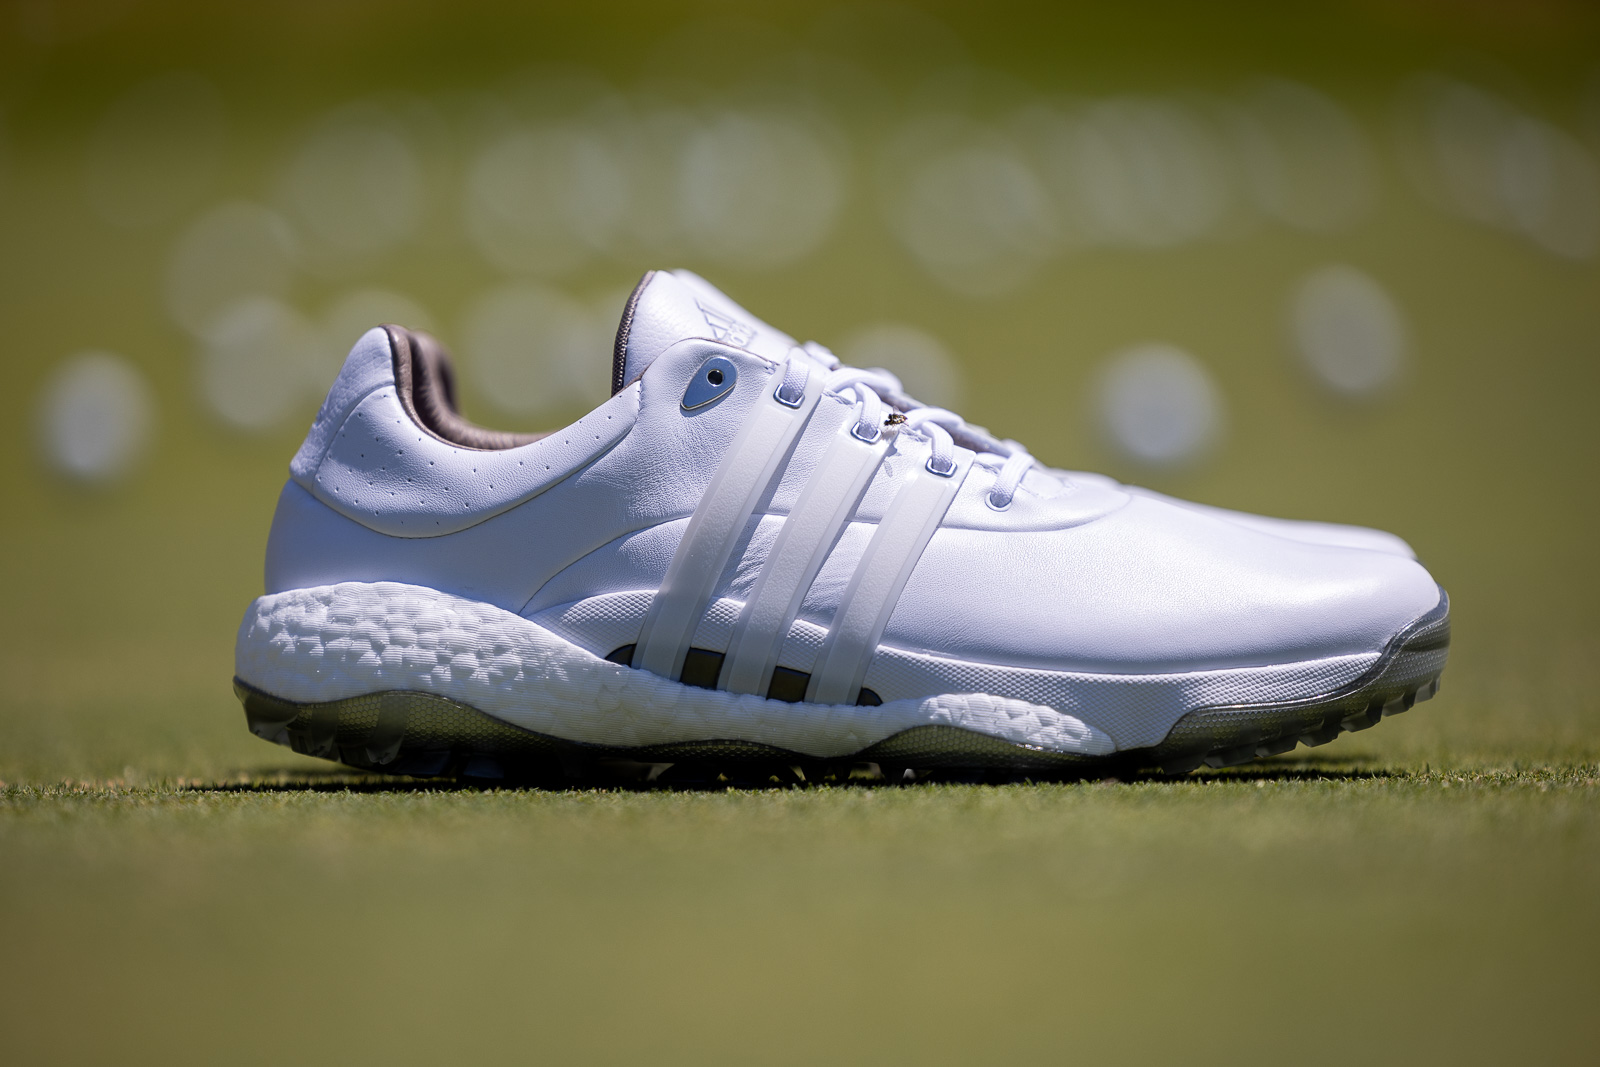 Adidas Tour 360 Review: The Ultimate Tour Level Golf Shoe